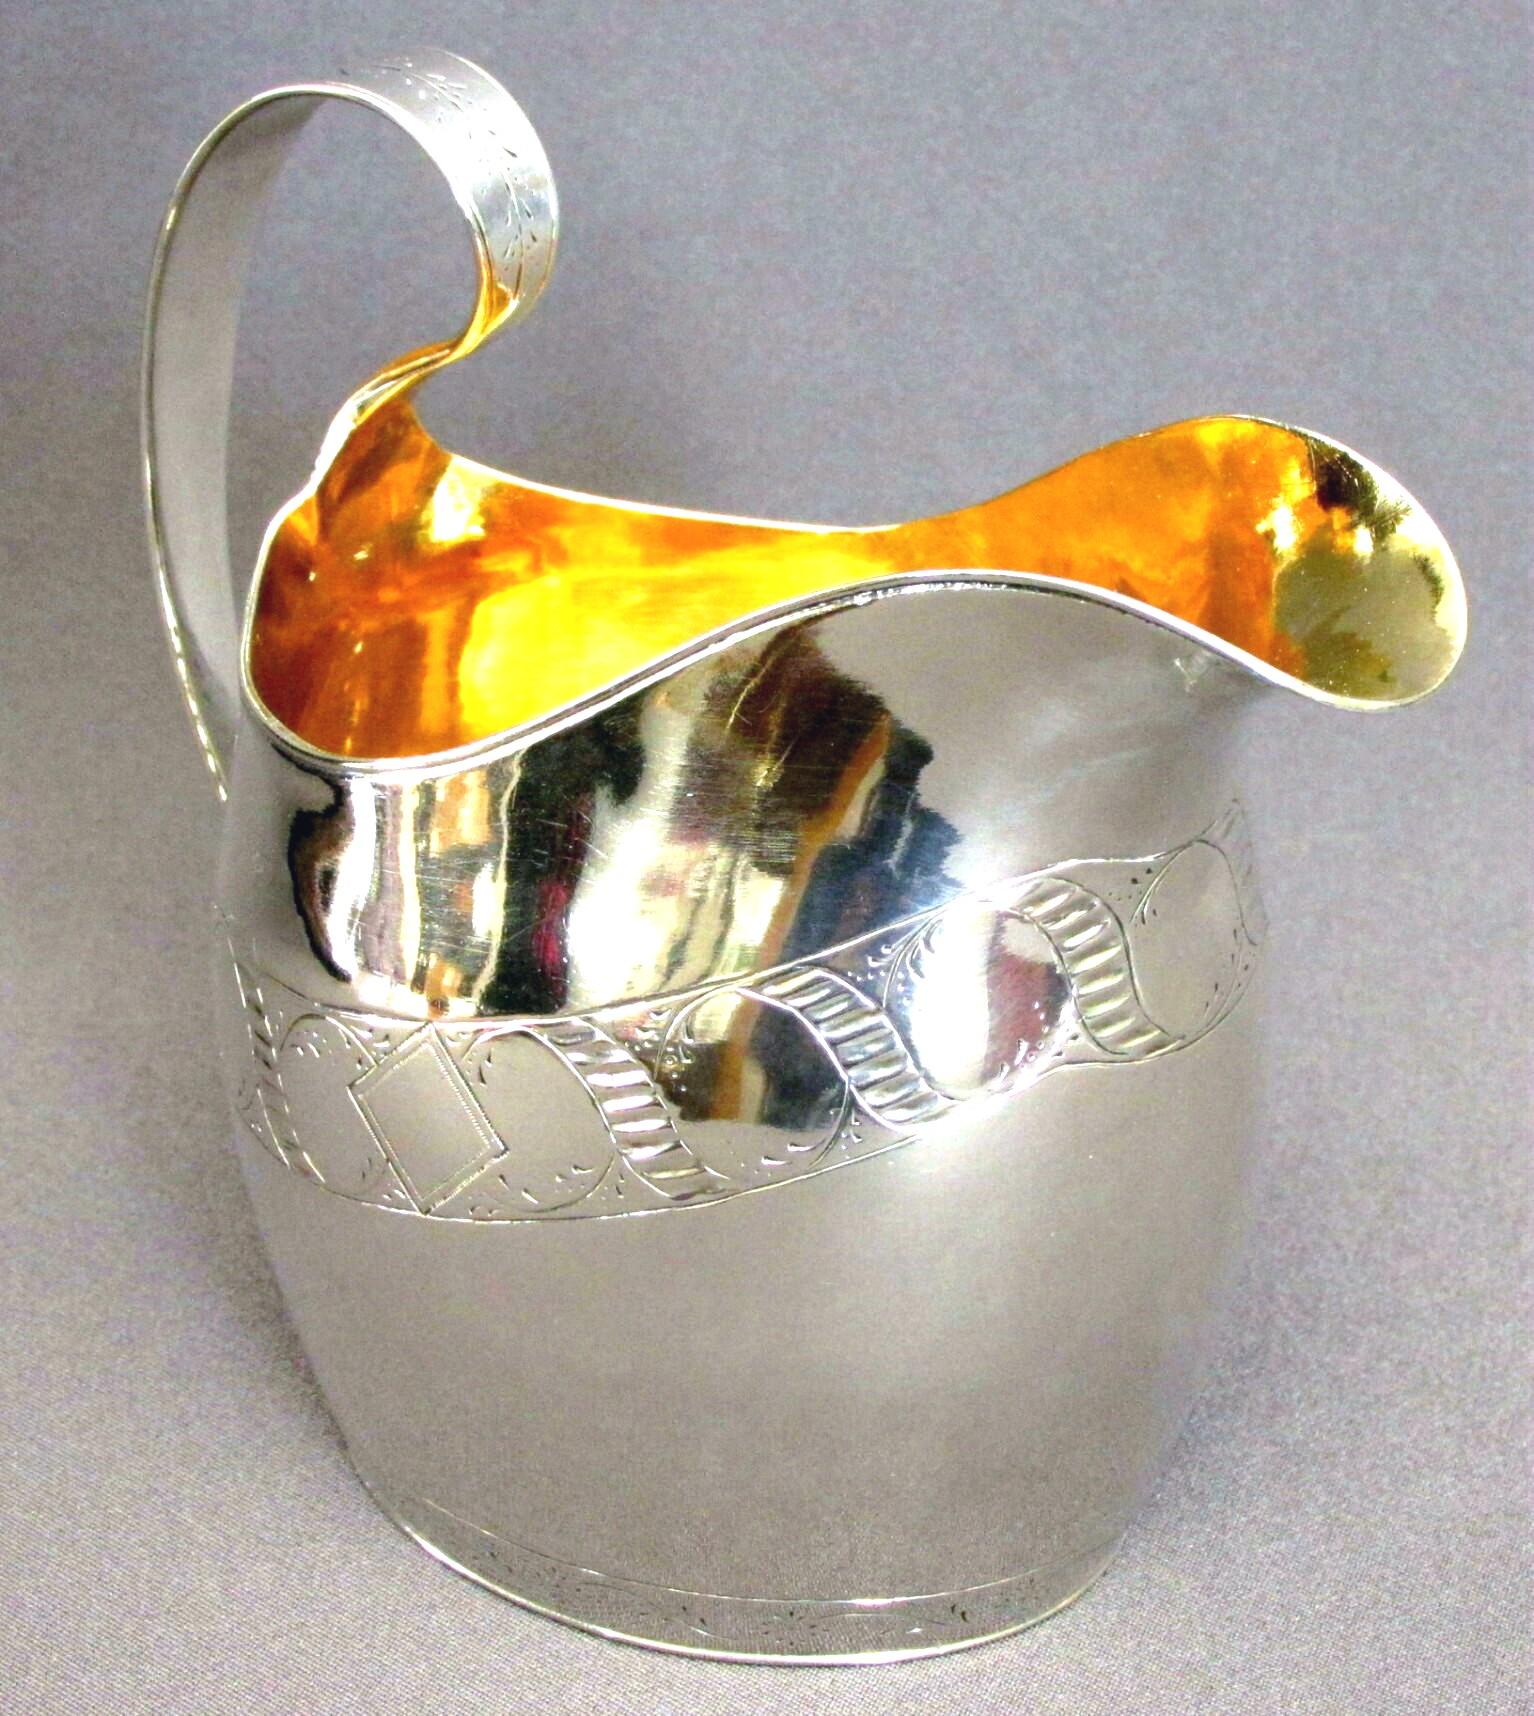 A very handsome and heavy sterling silver cream jug of oval bellied form, decorated with an engraved band of repeating 'bright cut' guilloche motifs and a loop shaped handle with bright-cut detail, the interior exhibiting an exceptionally fine and